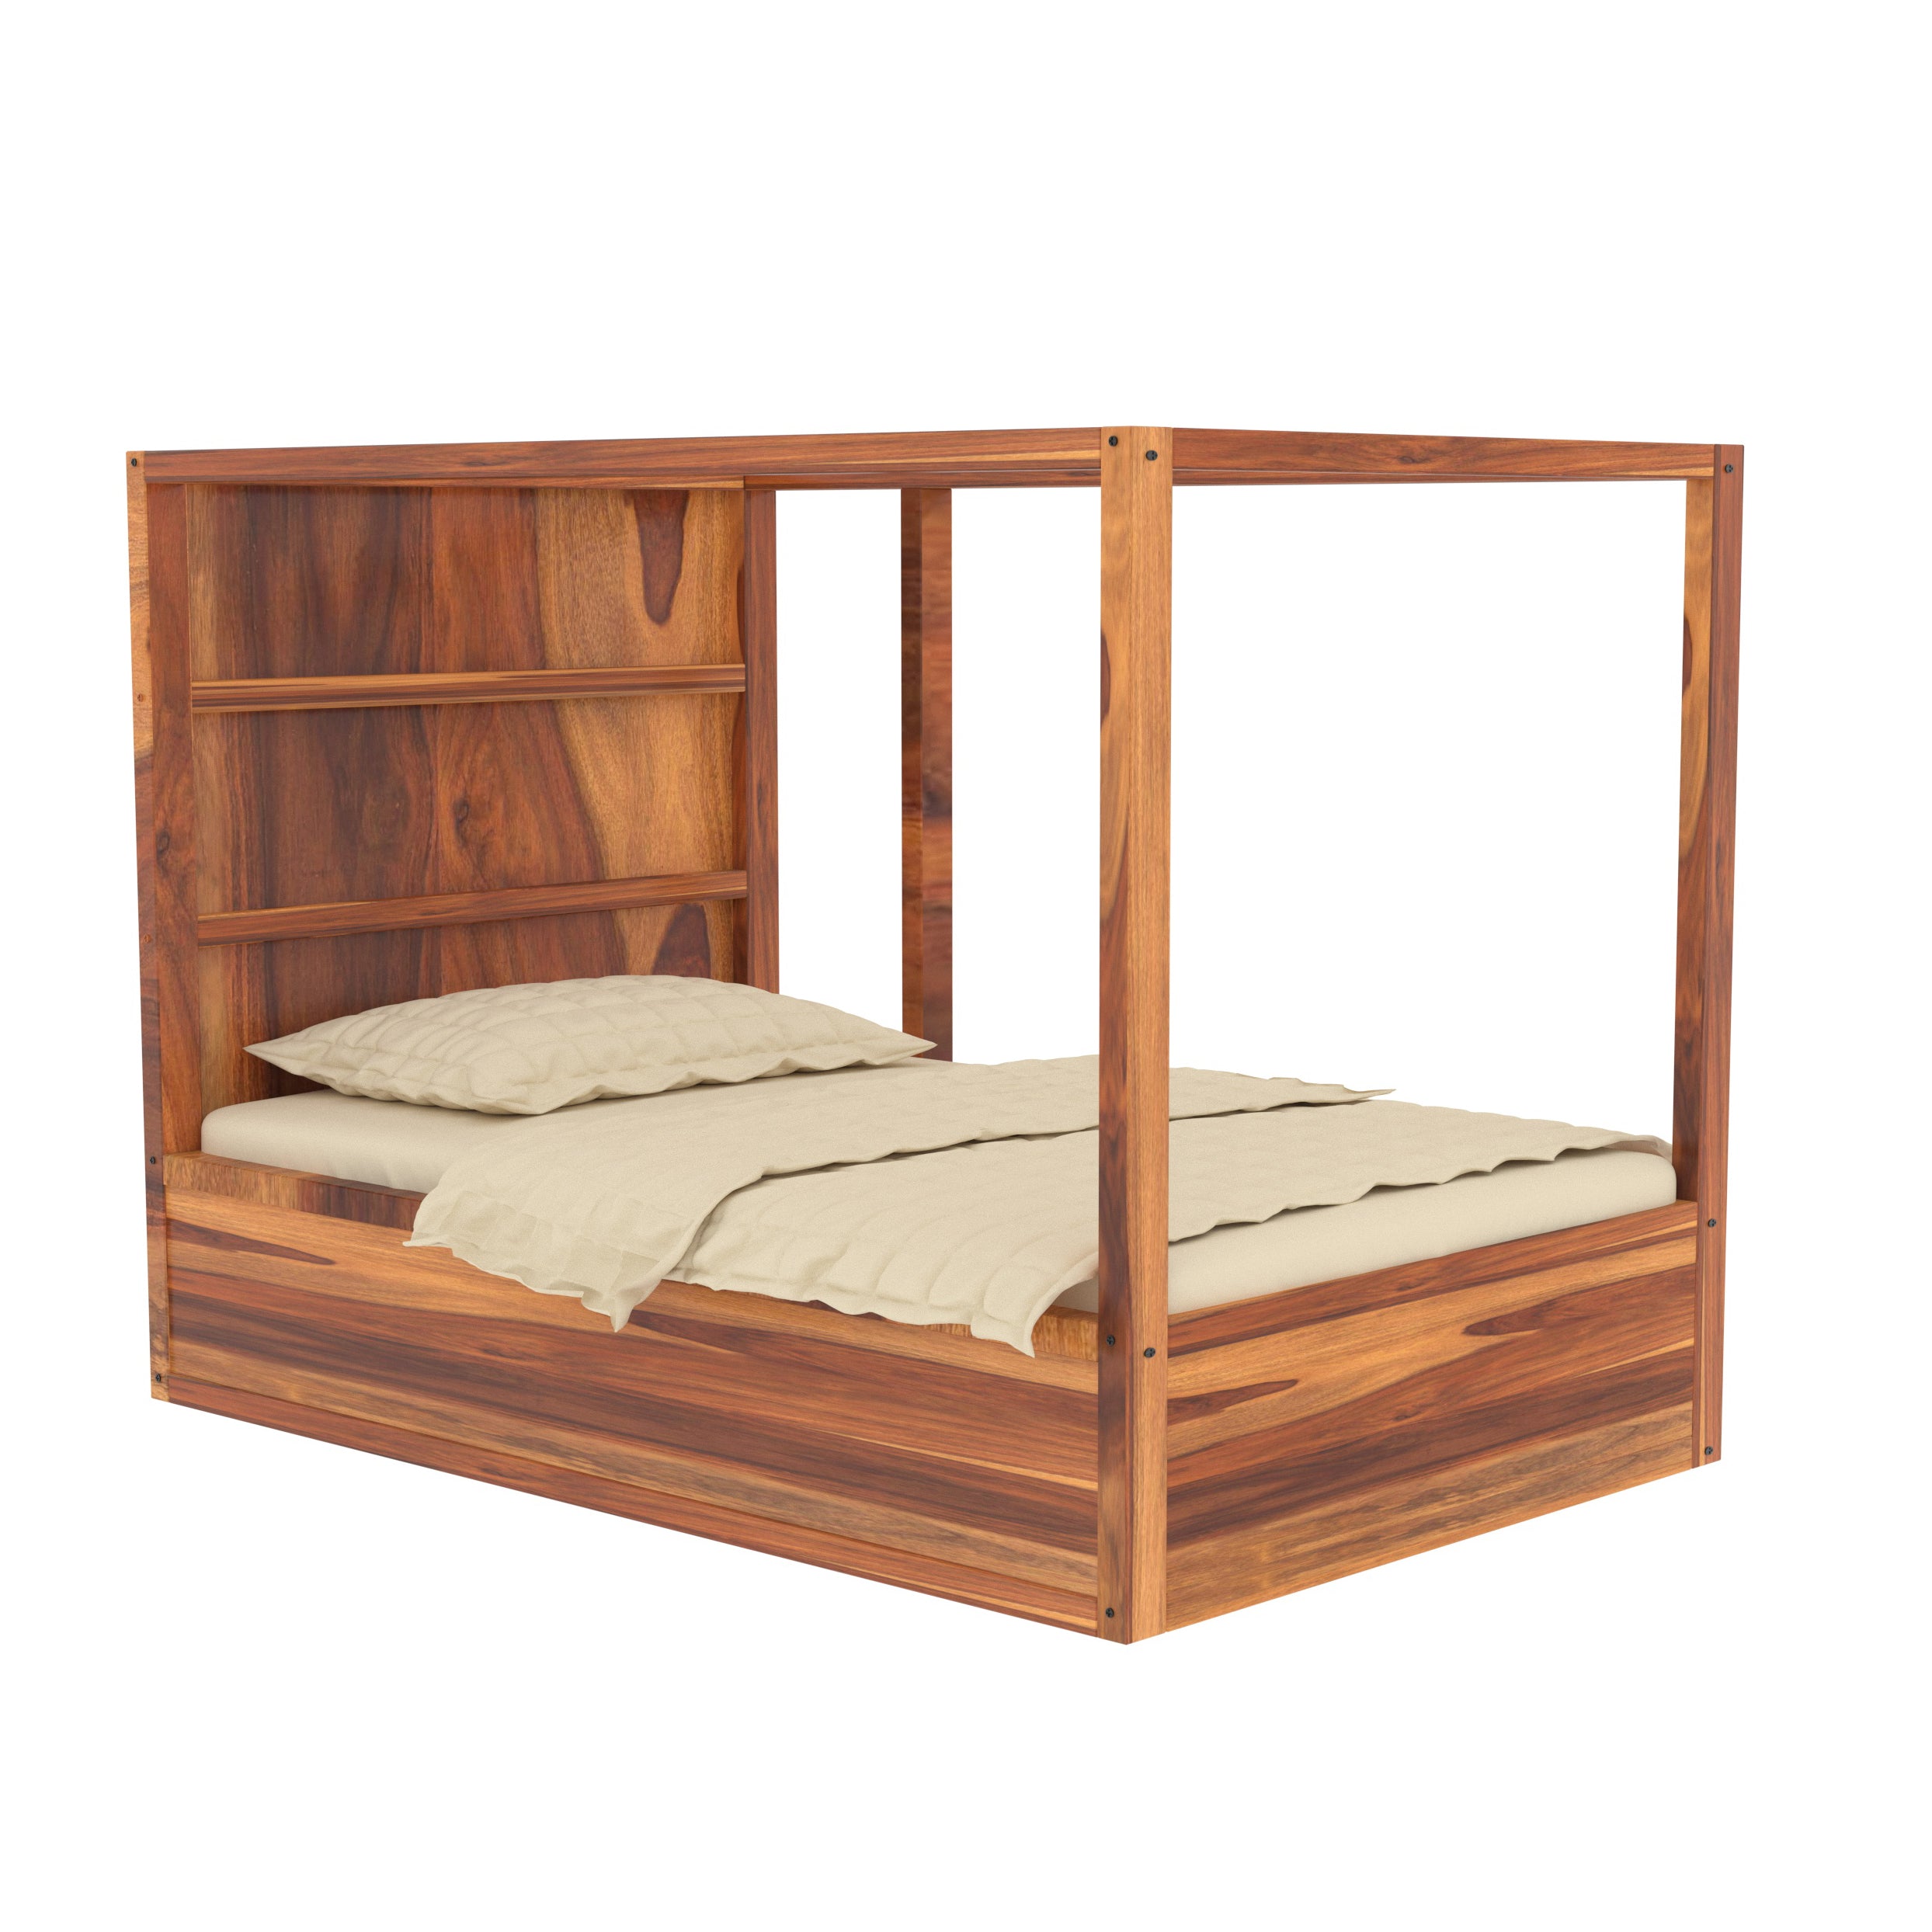 Premium Iconic Square Roof Wooden Vintage Bed Bed